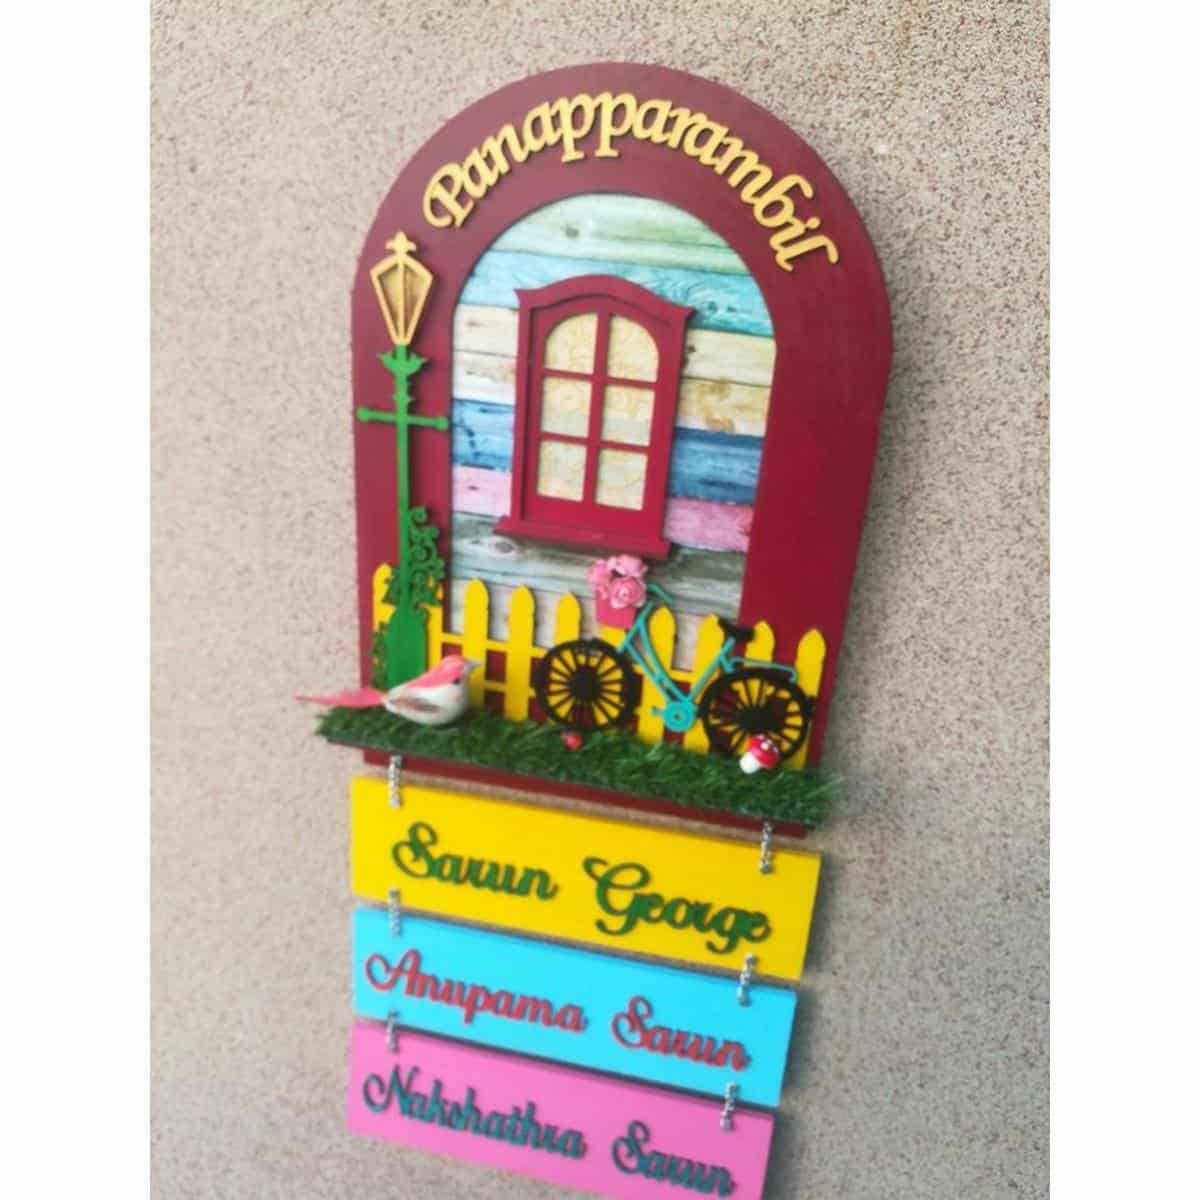 Arch Nameplate For Your Beautiful Home  